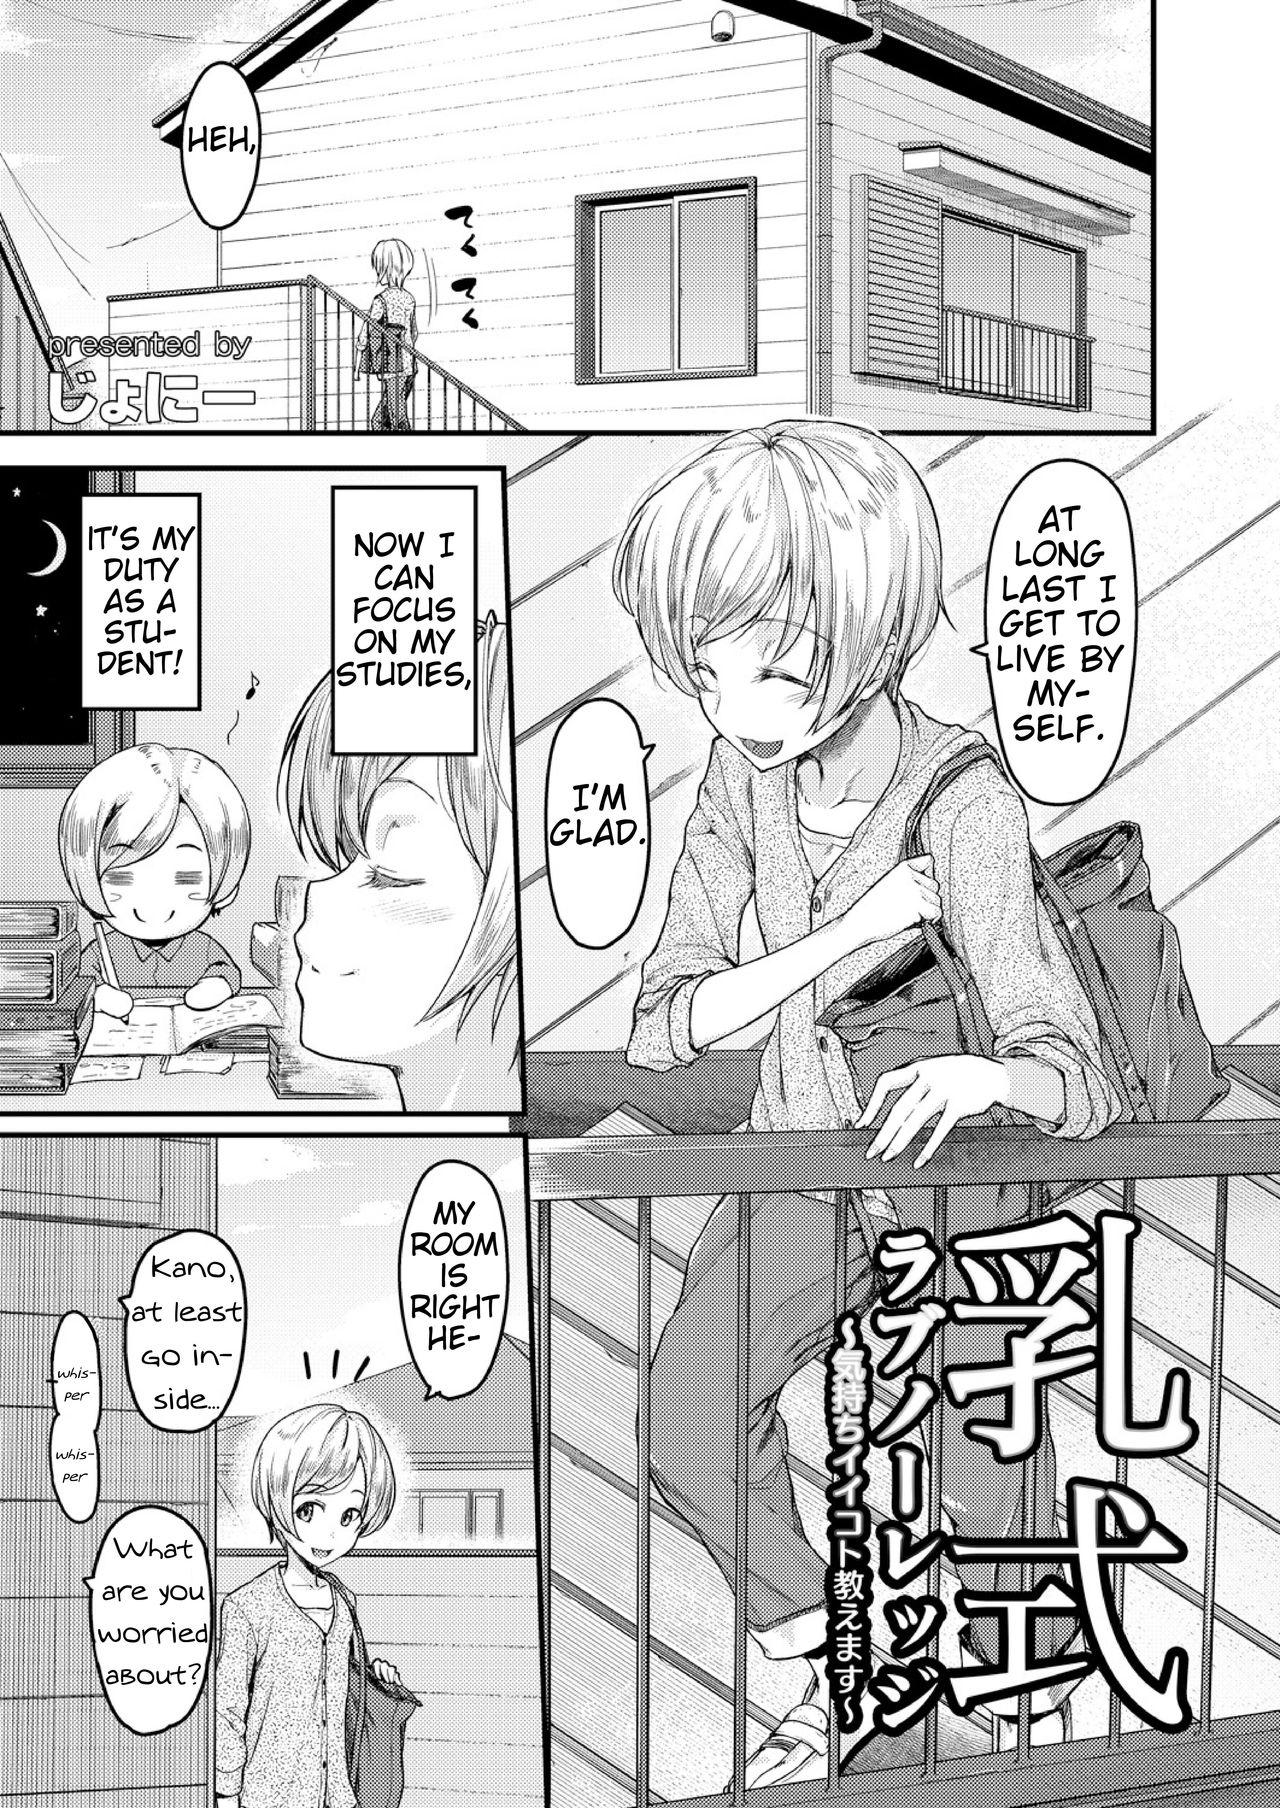 Casting [Johnny] Nyuushiki Love Knowledge ~I'll Teach You Something Nice~ Chapter 1 [English] [AntaresNL667] Cougar - Page 3